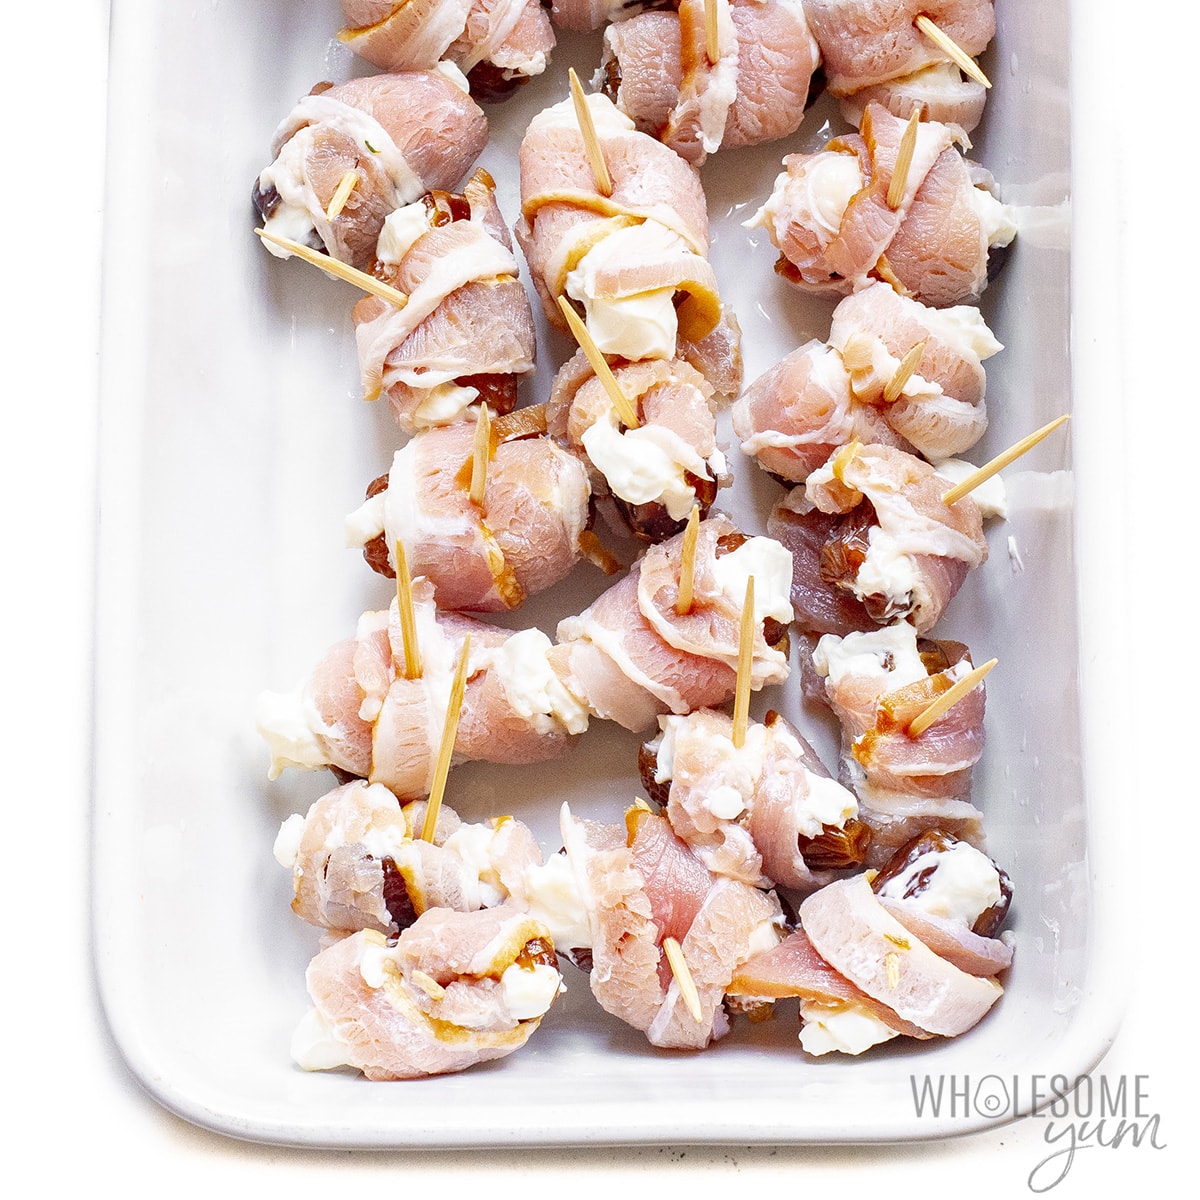 Arrange dates wrapped in bacon in a roasting pan.